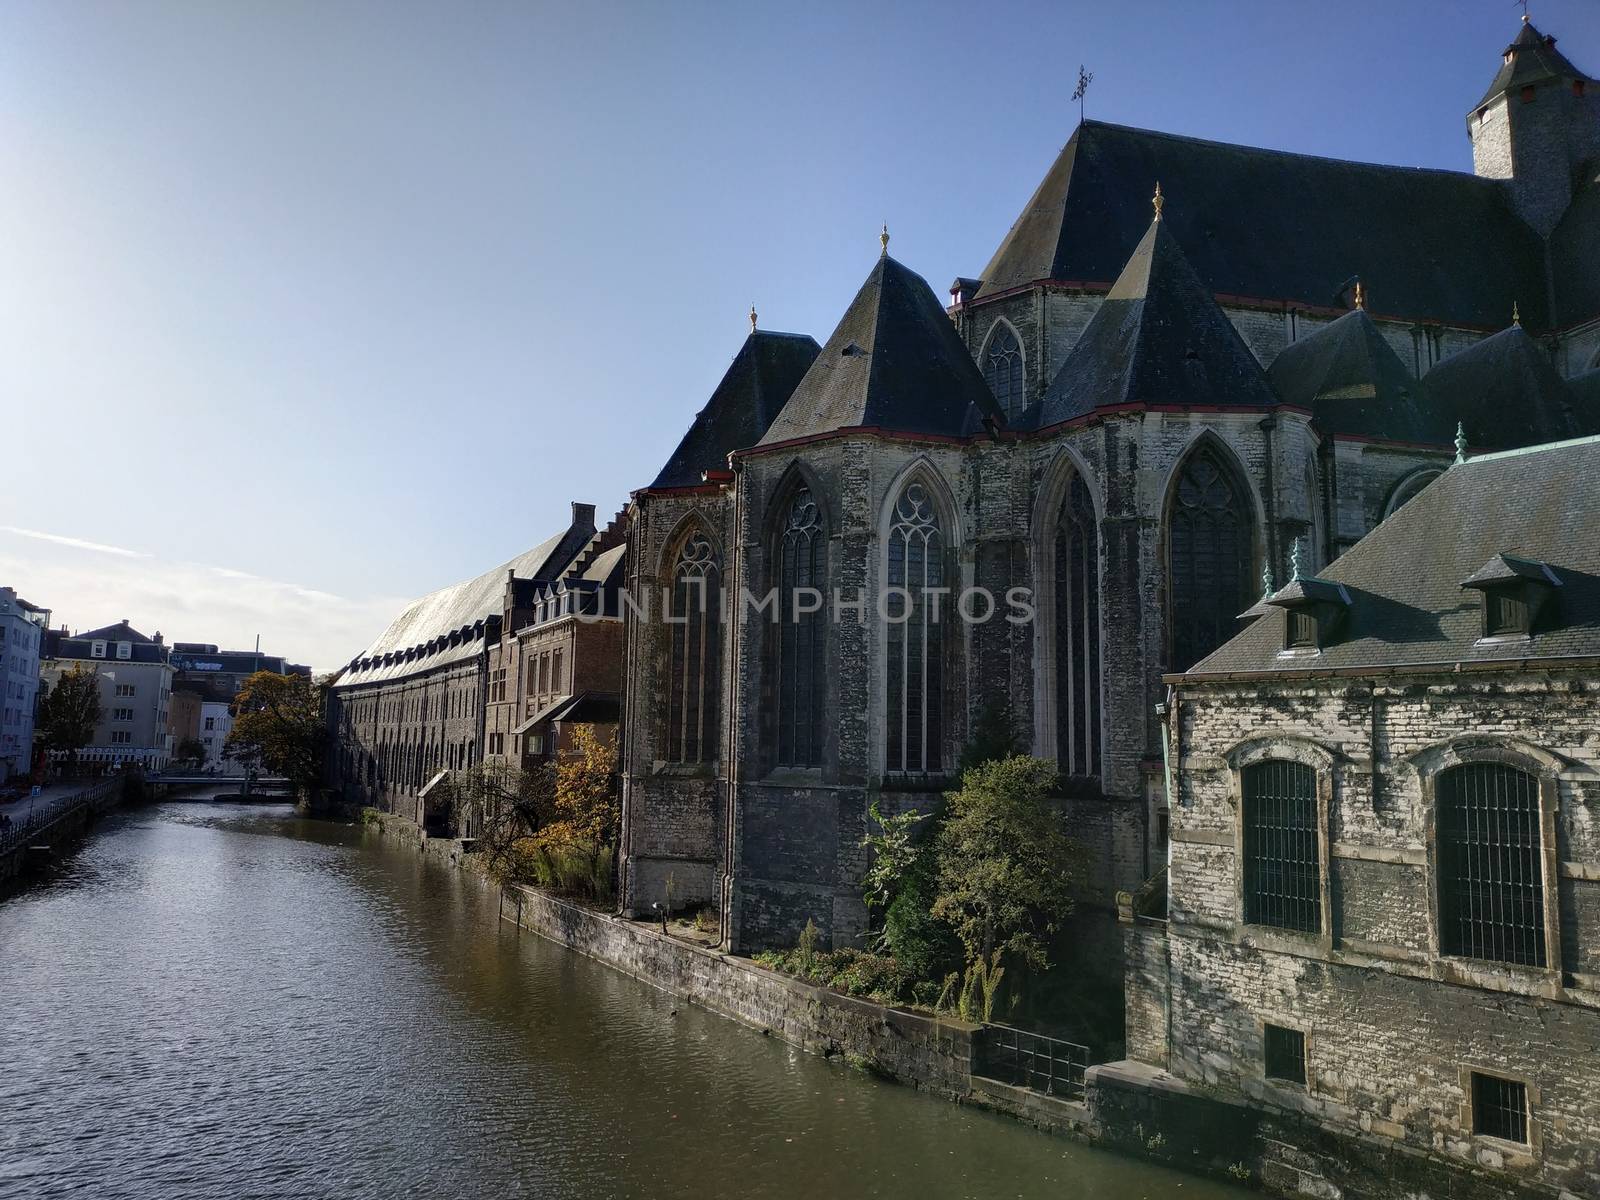 Ghent, Belgium - November 02, 2019: view on the streets and roads with tourists walking around by VIIIPhoto